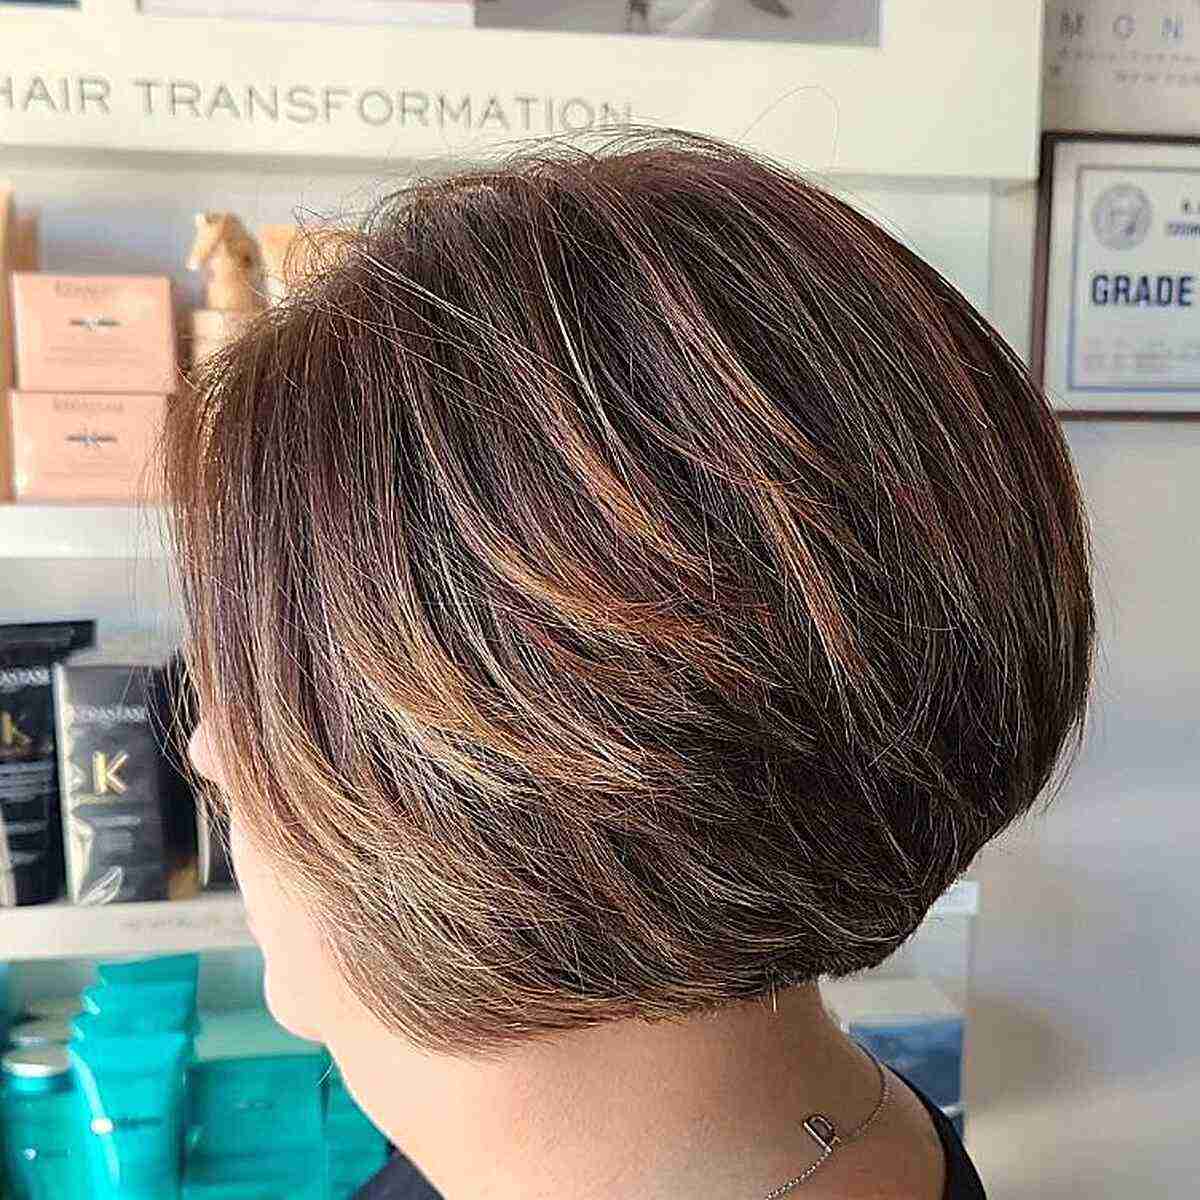 Short-Length Rounded Wedge Layered Bob Cut for Ladies Aged 50